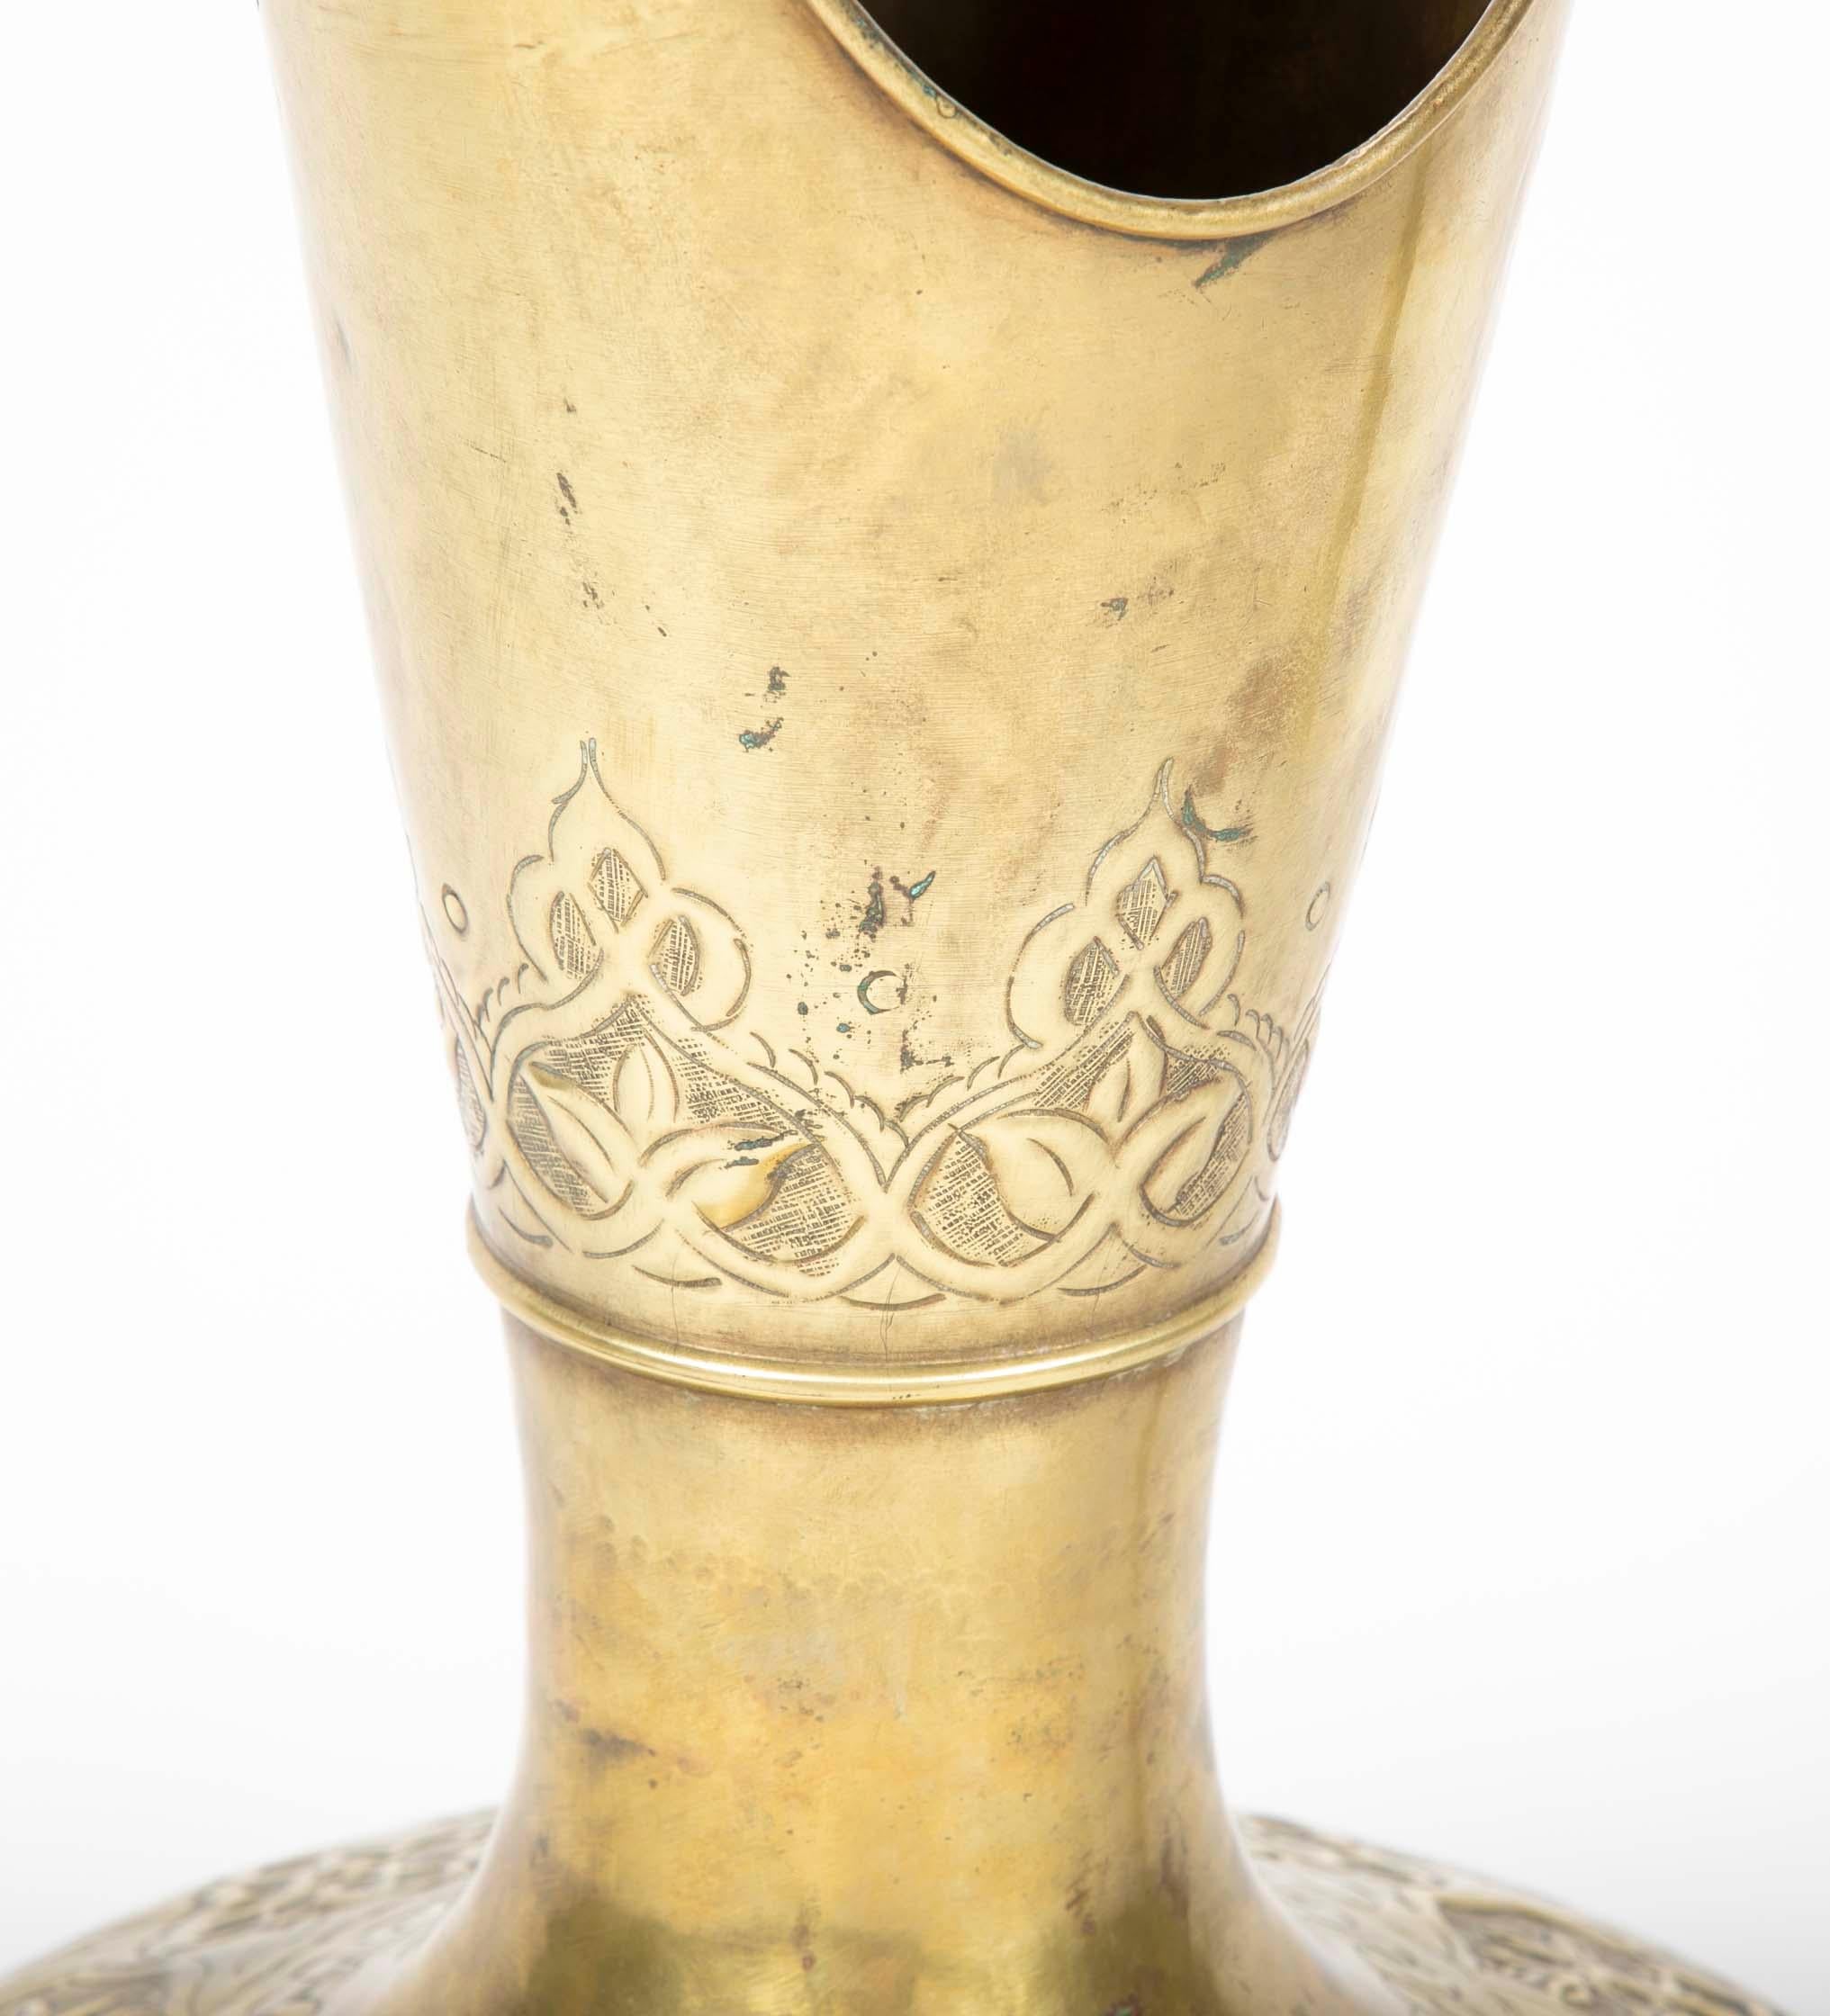 A stunning large-scale Ottoman period brass ewer with incised and repoussé decoration. The scale of this piece is truly impressive and the form so elegant, I have included a picture of the ewer on a side table to give a sense of the impression it